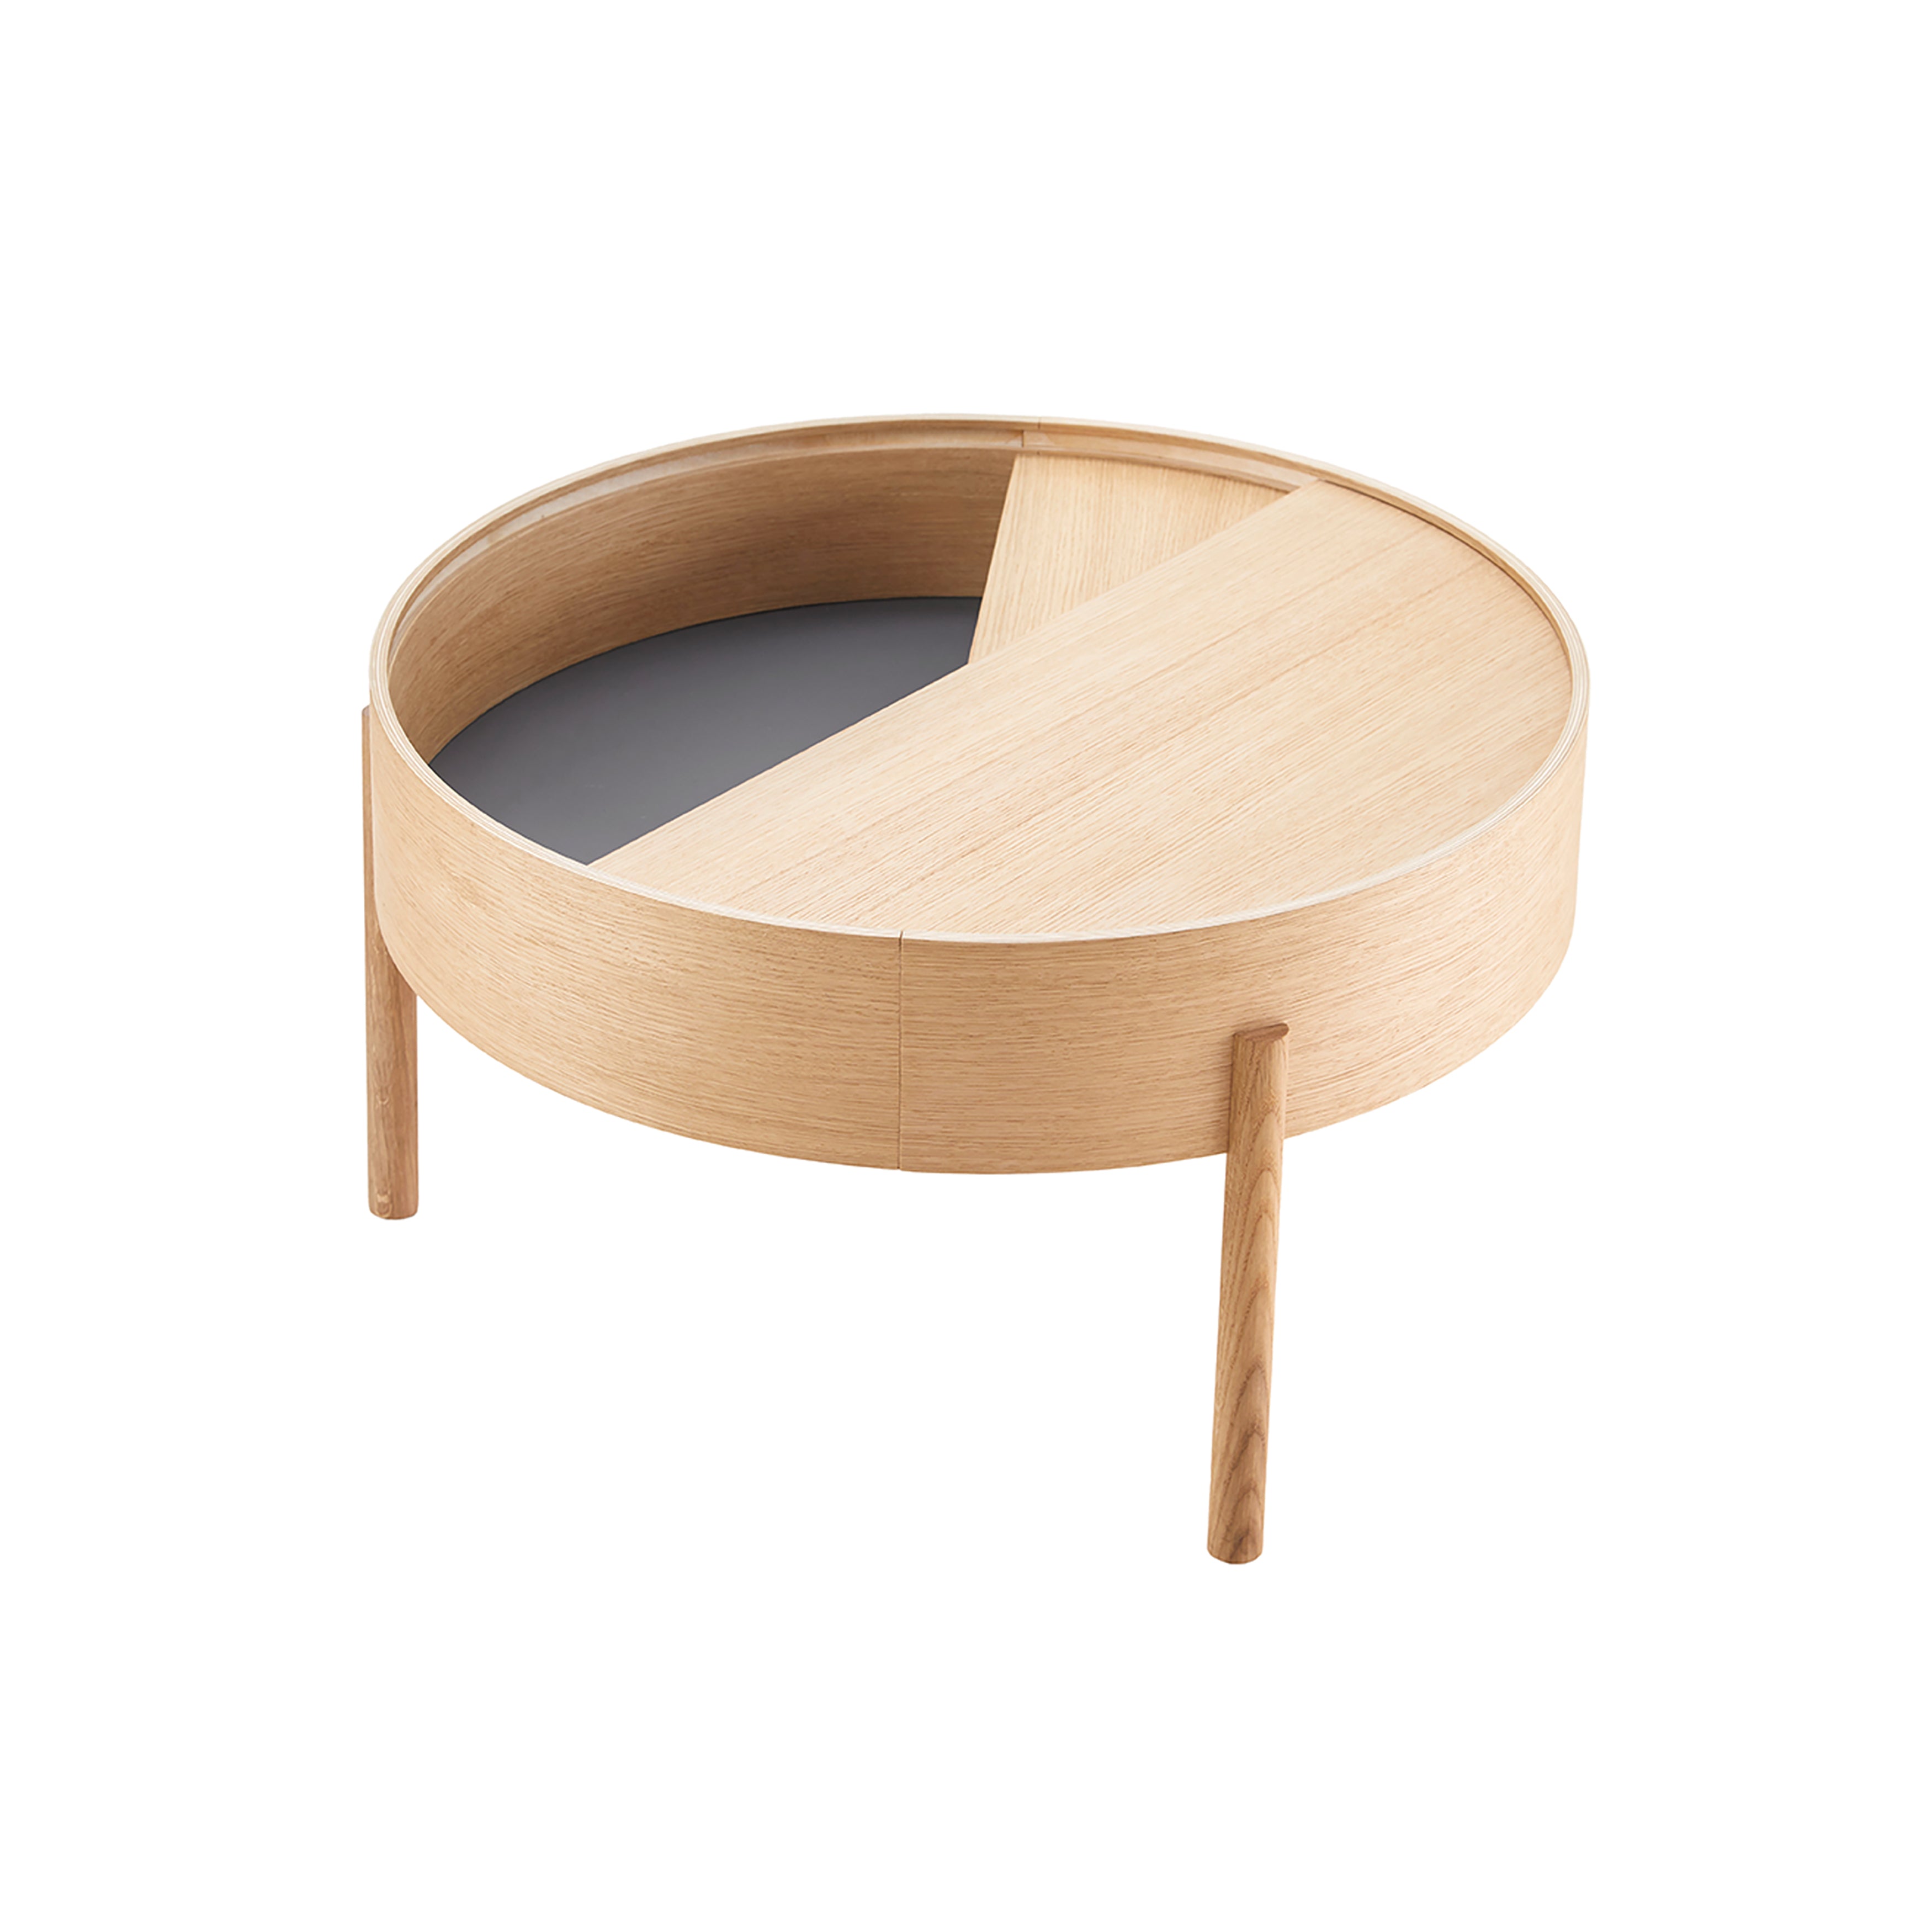 Arc Coffee Table: Small - 26